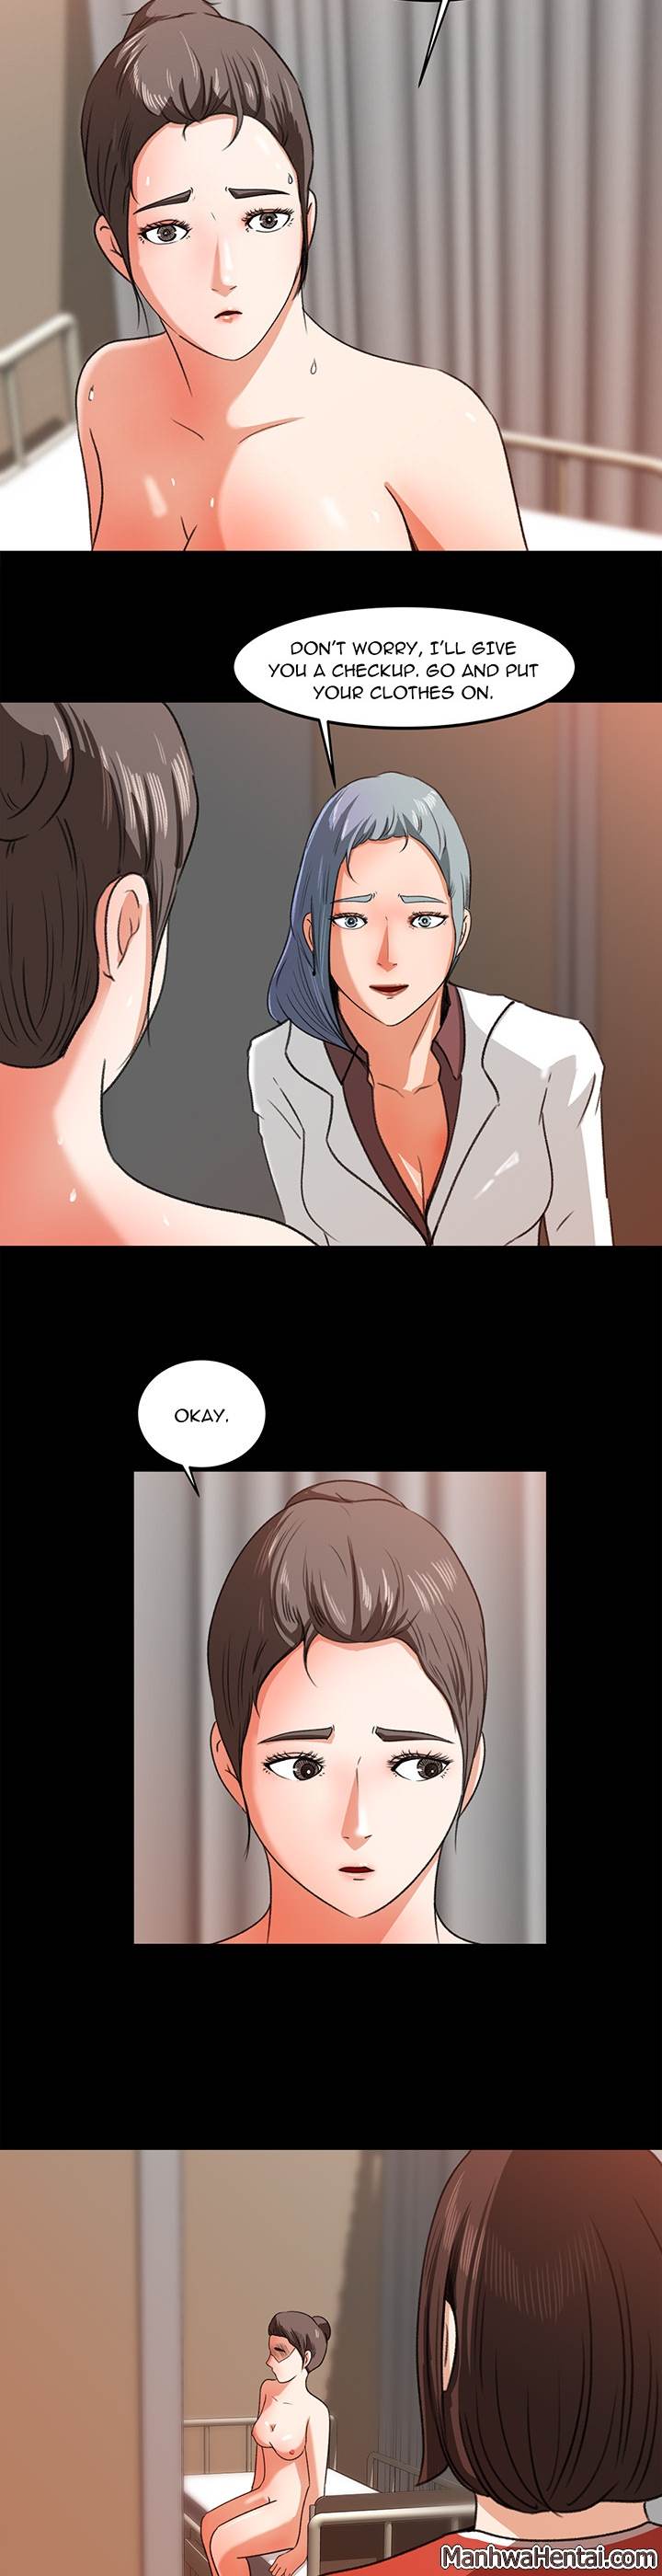 Inside the Uniform - Chapter 14 Page 14